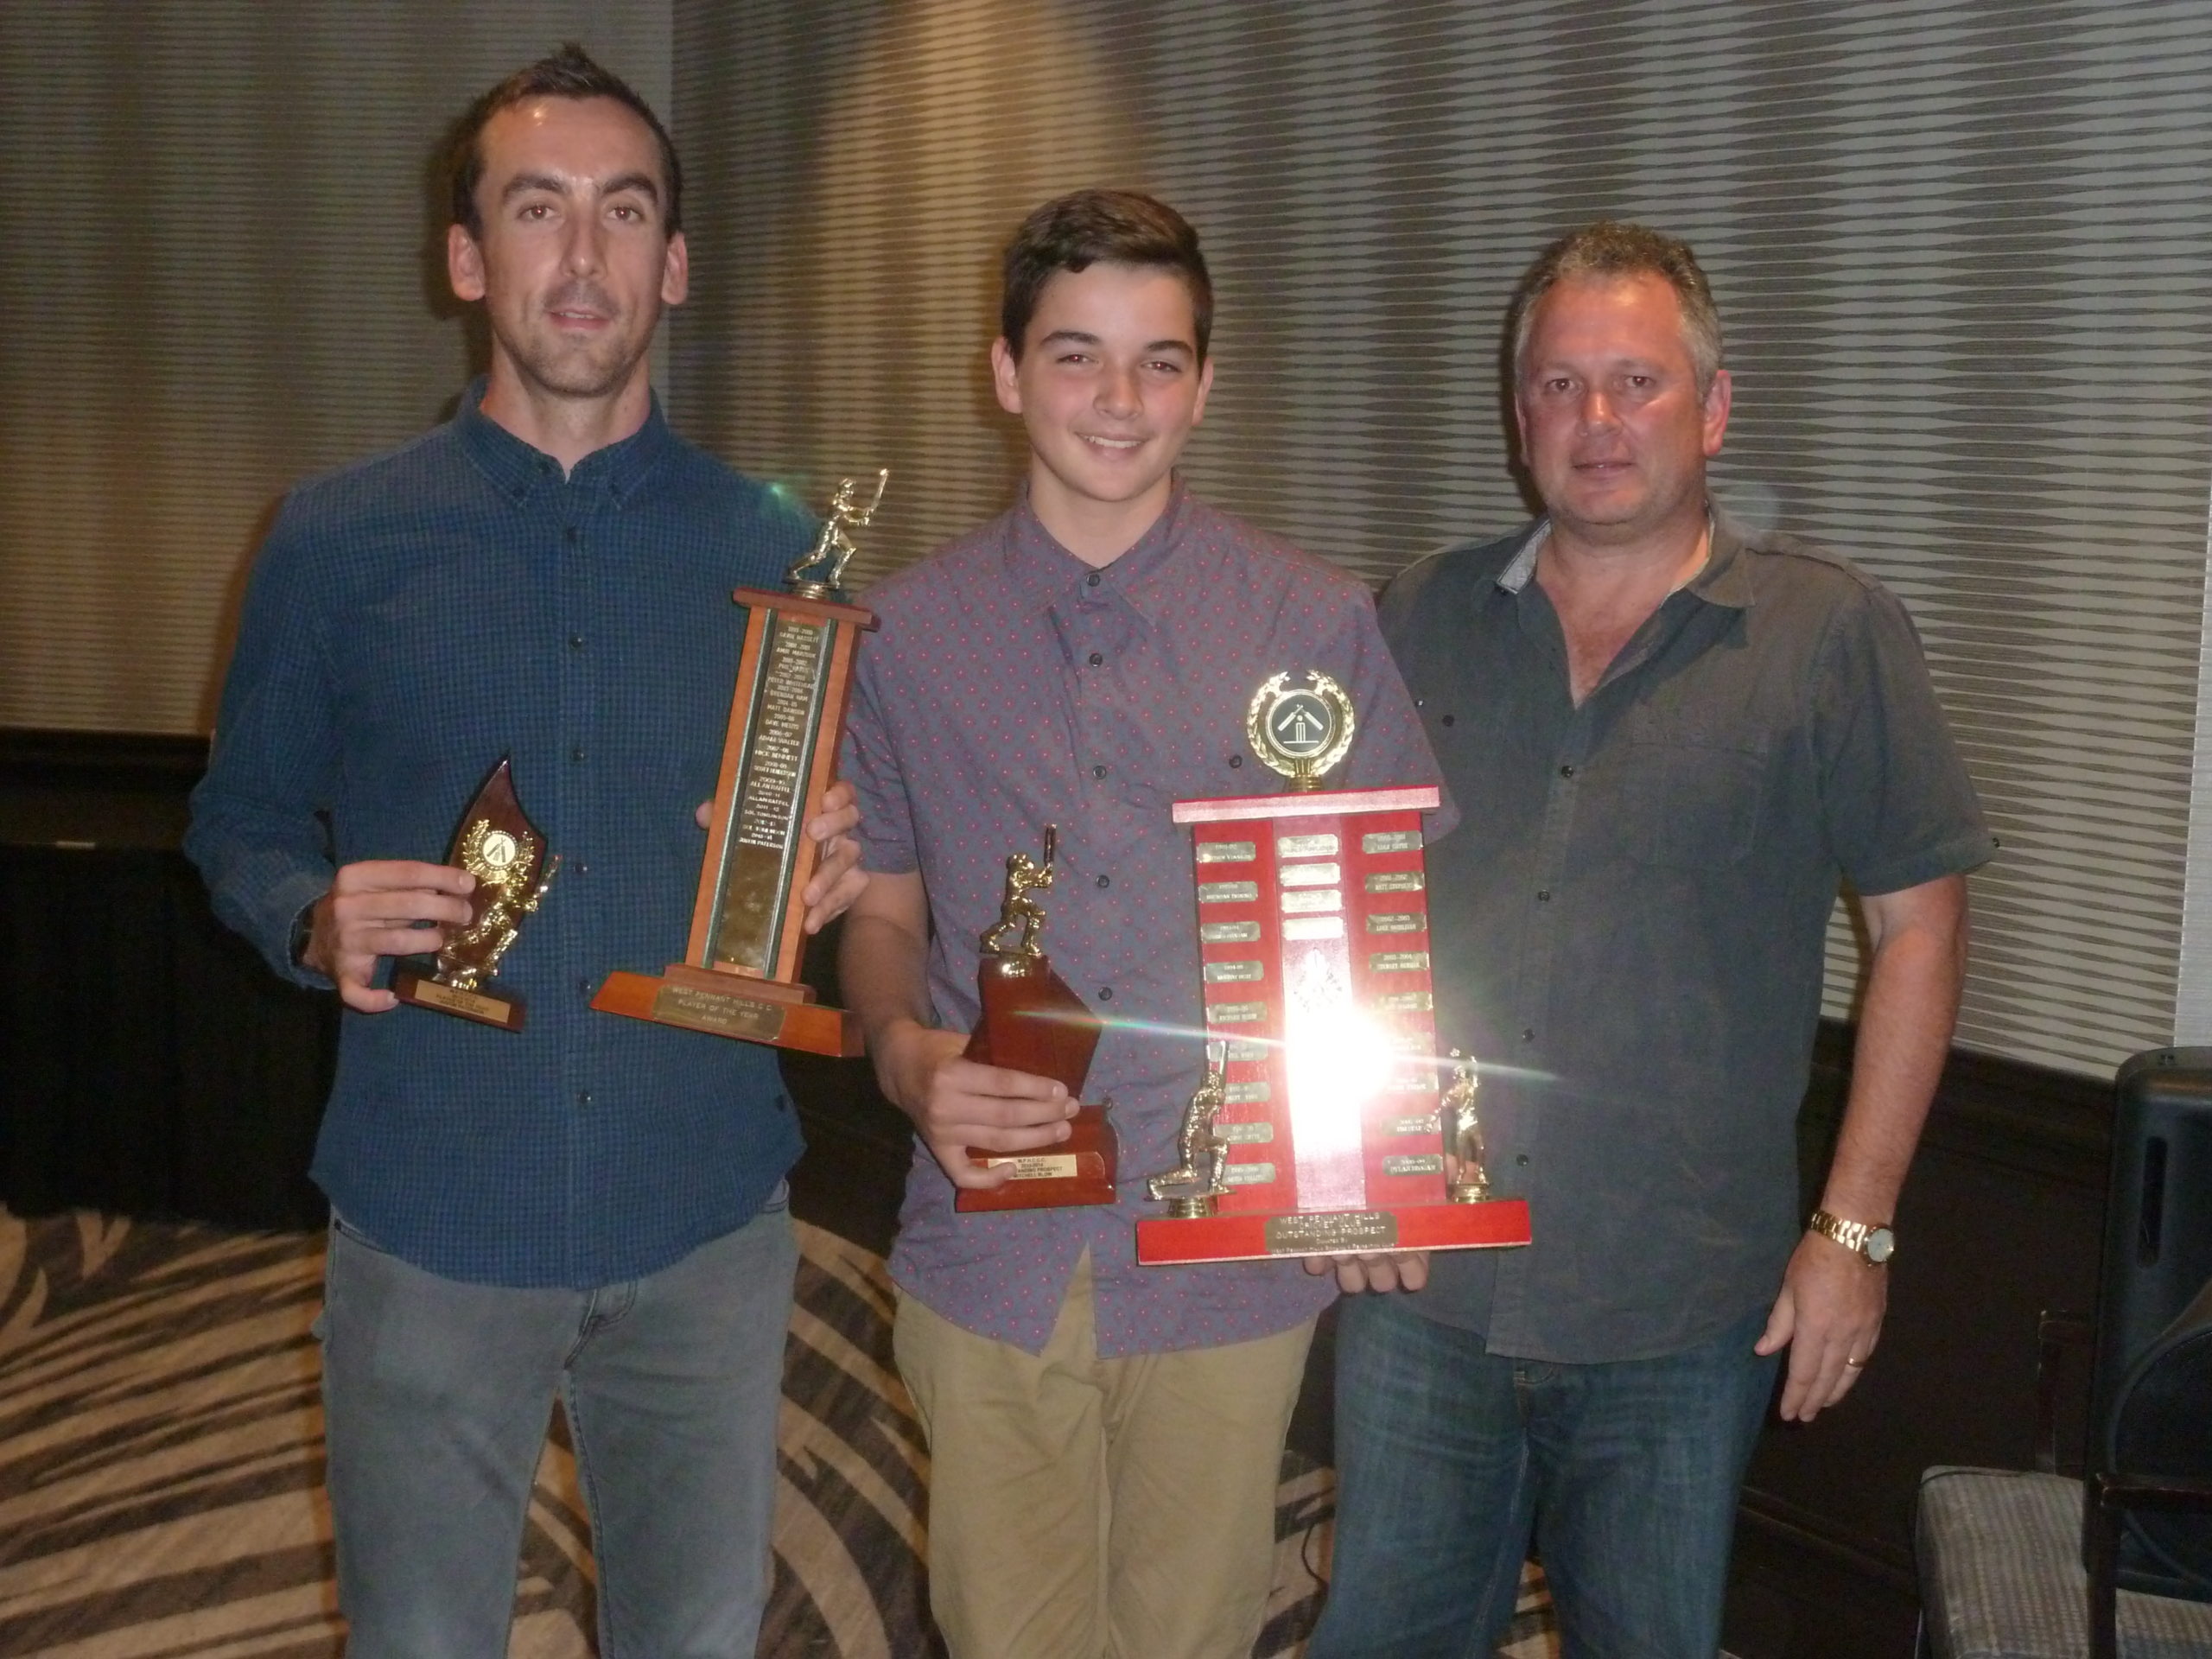 Player of the Year Justin Paterson (left) and Outstanding Prospect for 2013/14. Mitchell Blow with Andrew Fiedler at the Seniors Presentation Night - Castle Hill RSL Friday 4th May 2014. Justin (C1) scored 499 runs @ 31.2 and took 56 wickets @ 9.3. Mitchell took 34 wickets @ 6.2 to set an all-time C3 Grade Association record for best bowling average. Seniors Presentation Night, Castle Hill RSL Friday 2nd May 2014.